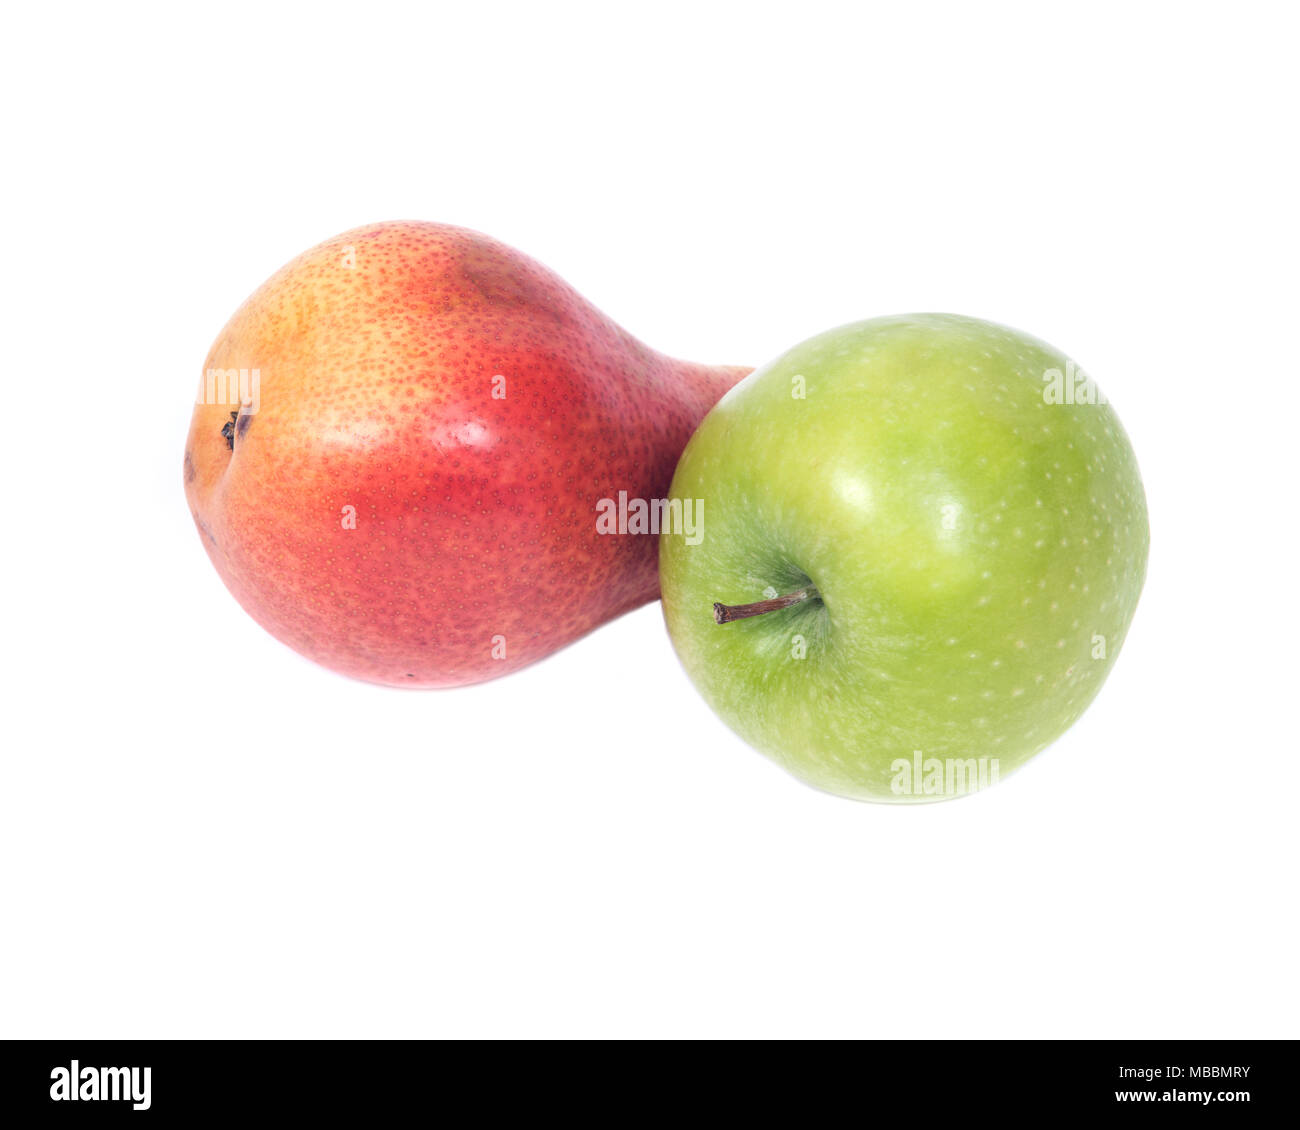 https://c8.alamy.com/comp/MBBMRY/organic-bartlett-pear-and-granny-smith-apple-isolated-on-white-background-MBBMRY.jpg